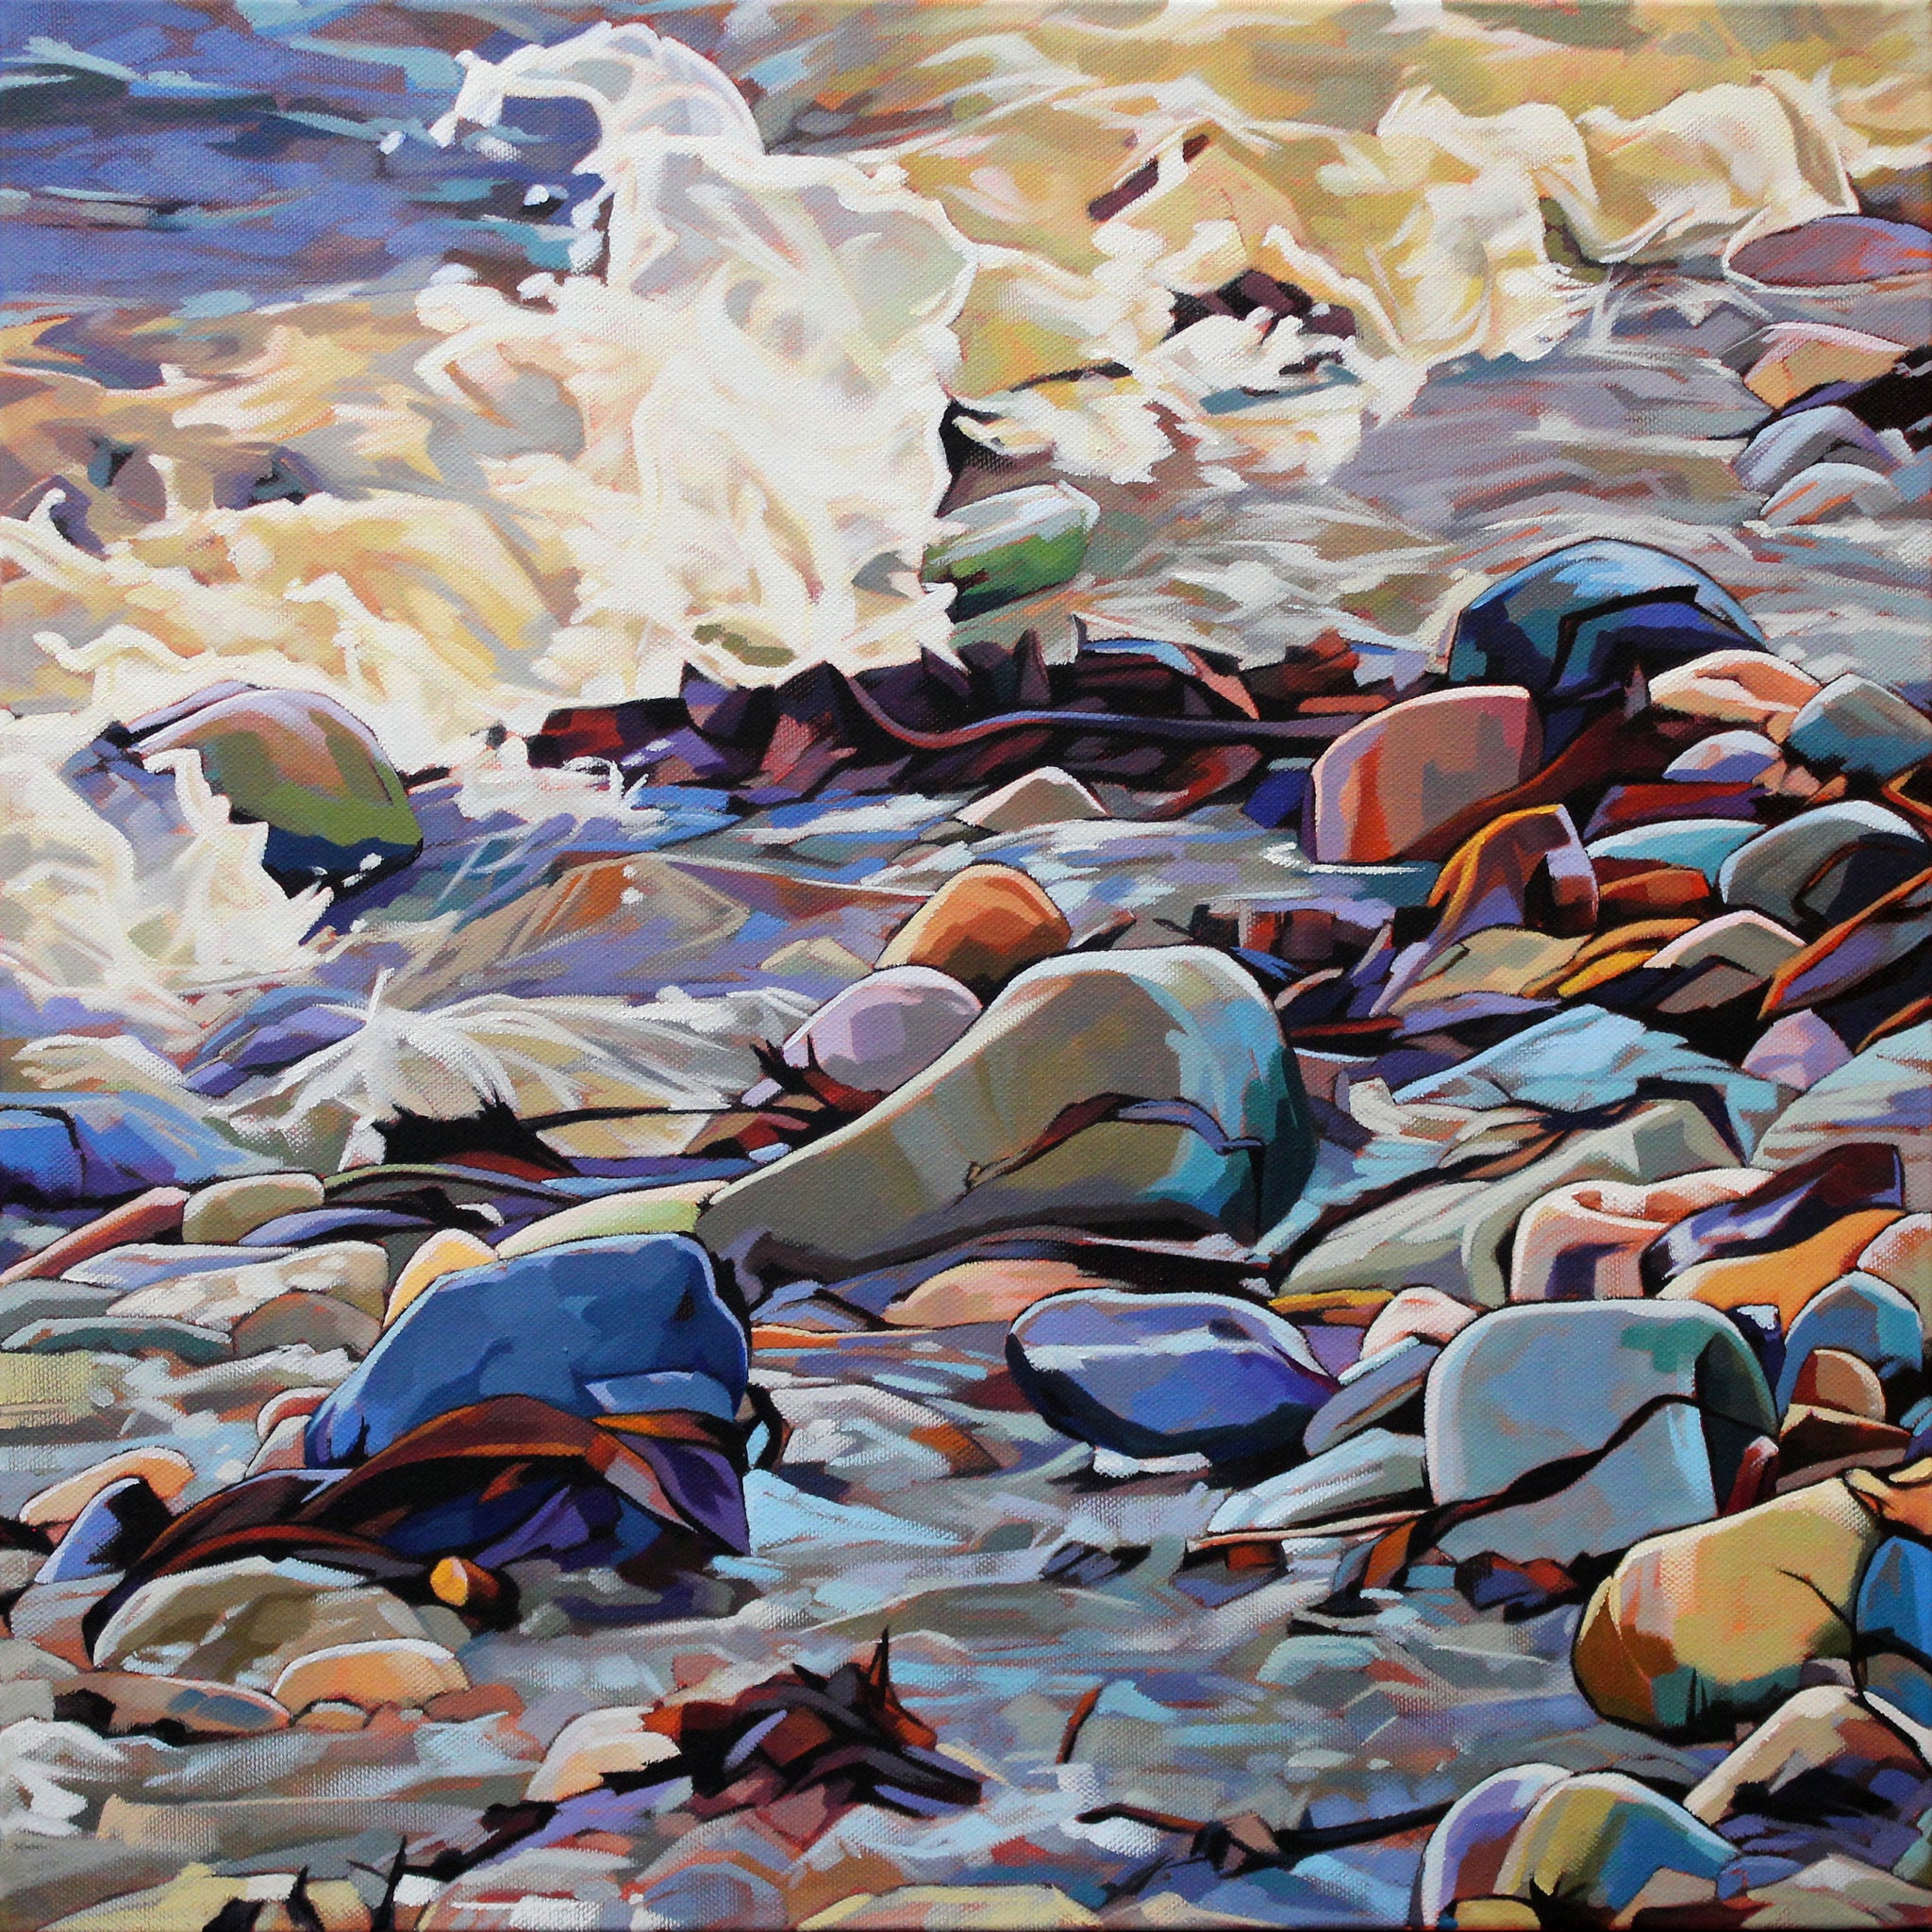 Pebbles At Cregg II - Contemporary art from Ireland. Paintings & prints by Irish seascape & landscape artist Kevin Lowery.